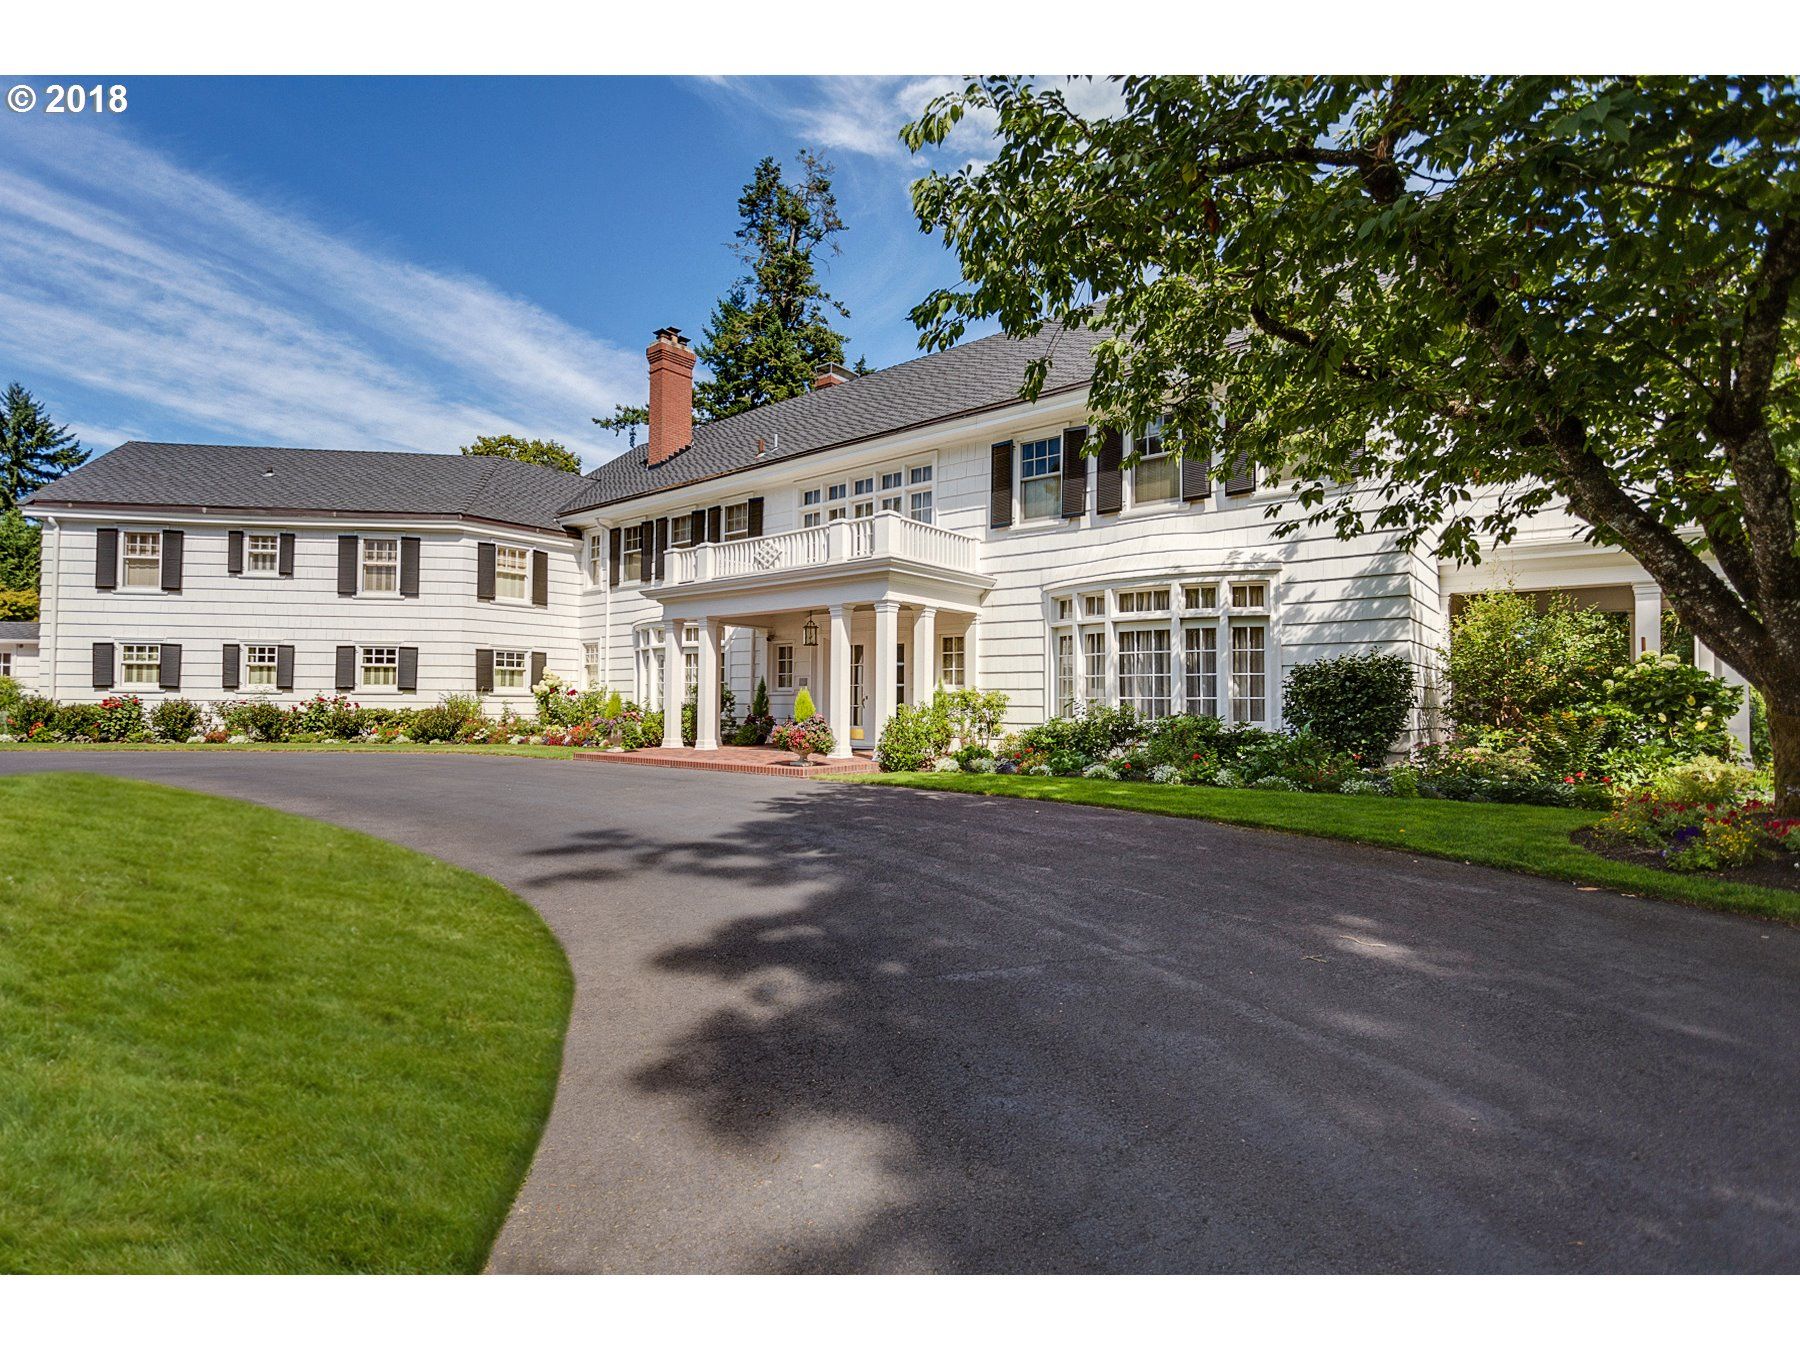 Oregon Luxury Homes and Oregon Luxury Real Estate | Property Search